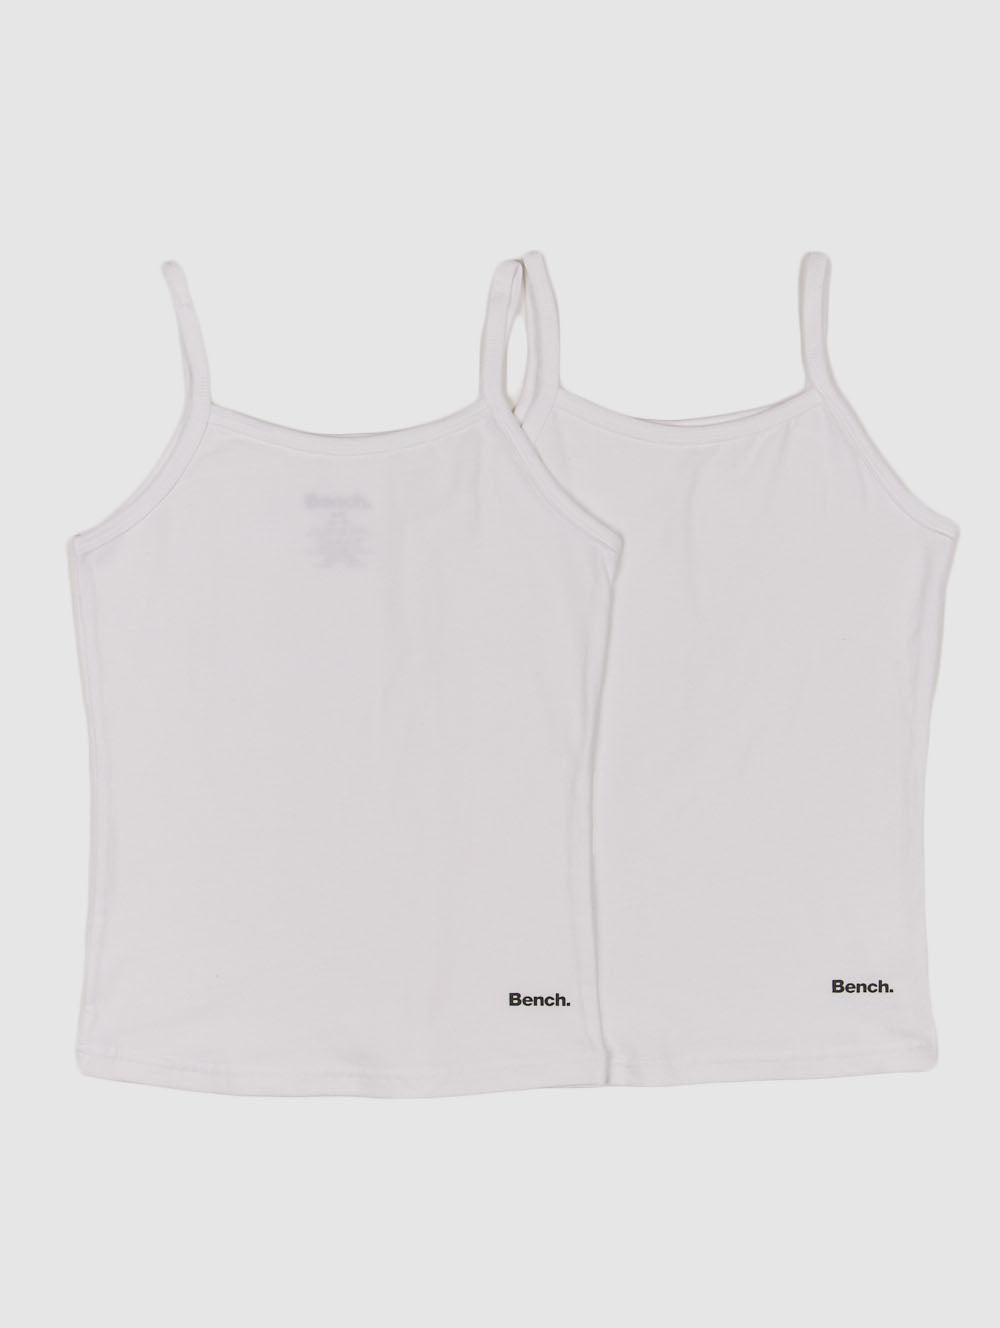 Girls Camisoles - 2 Pack - UGBN027